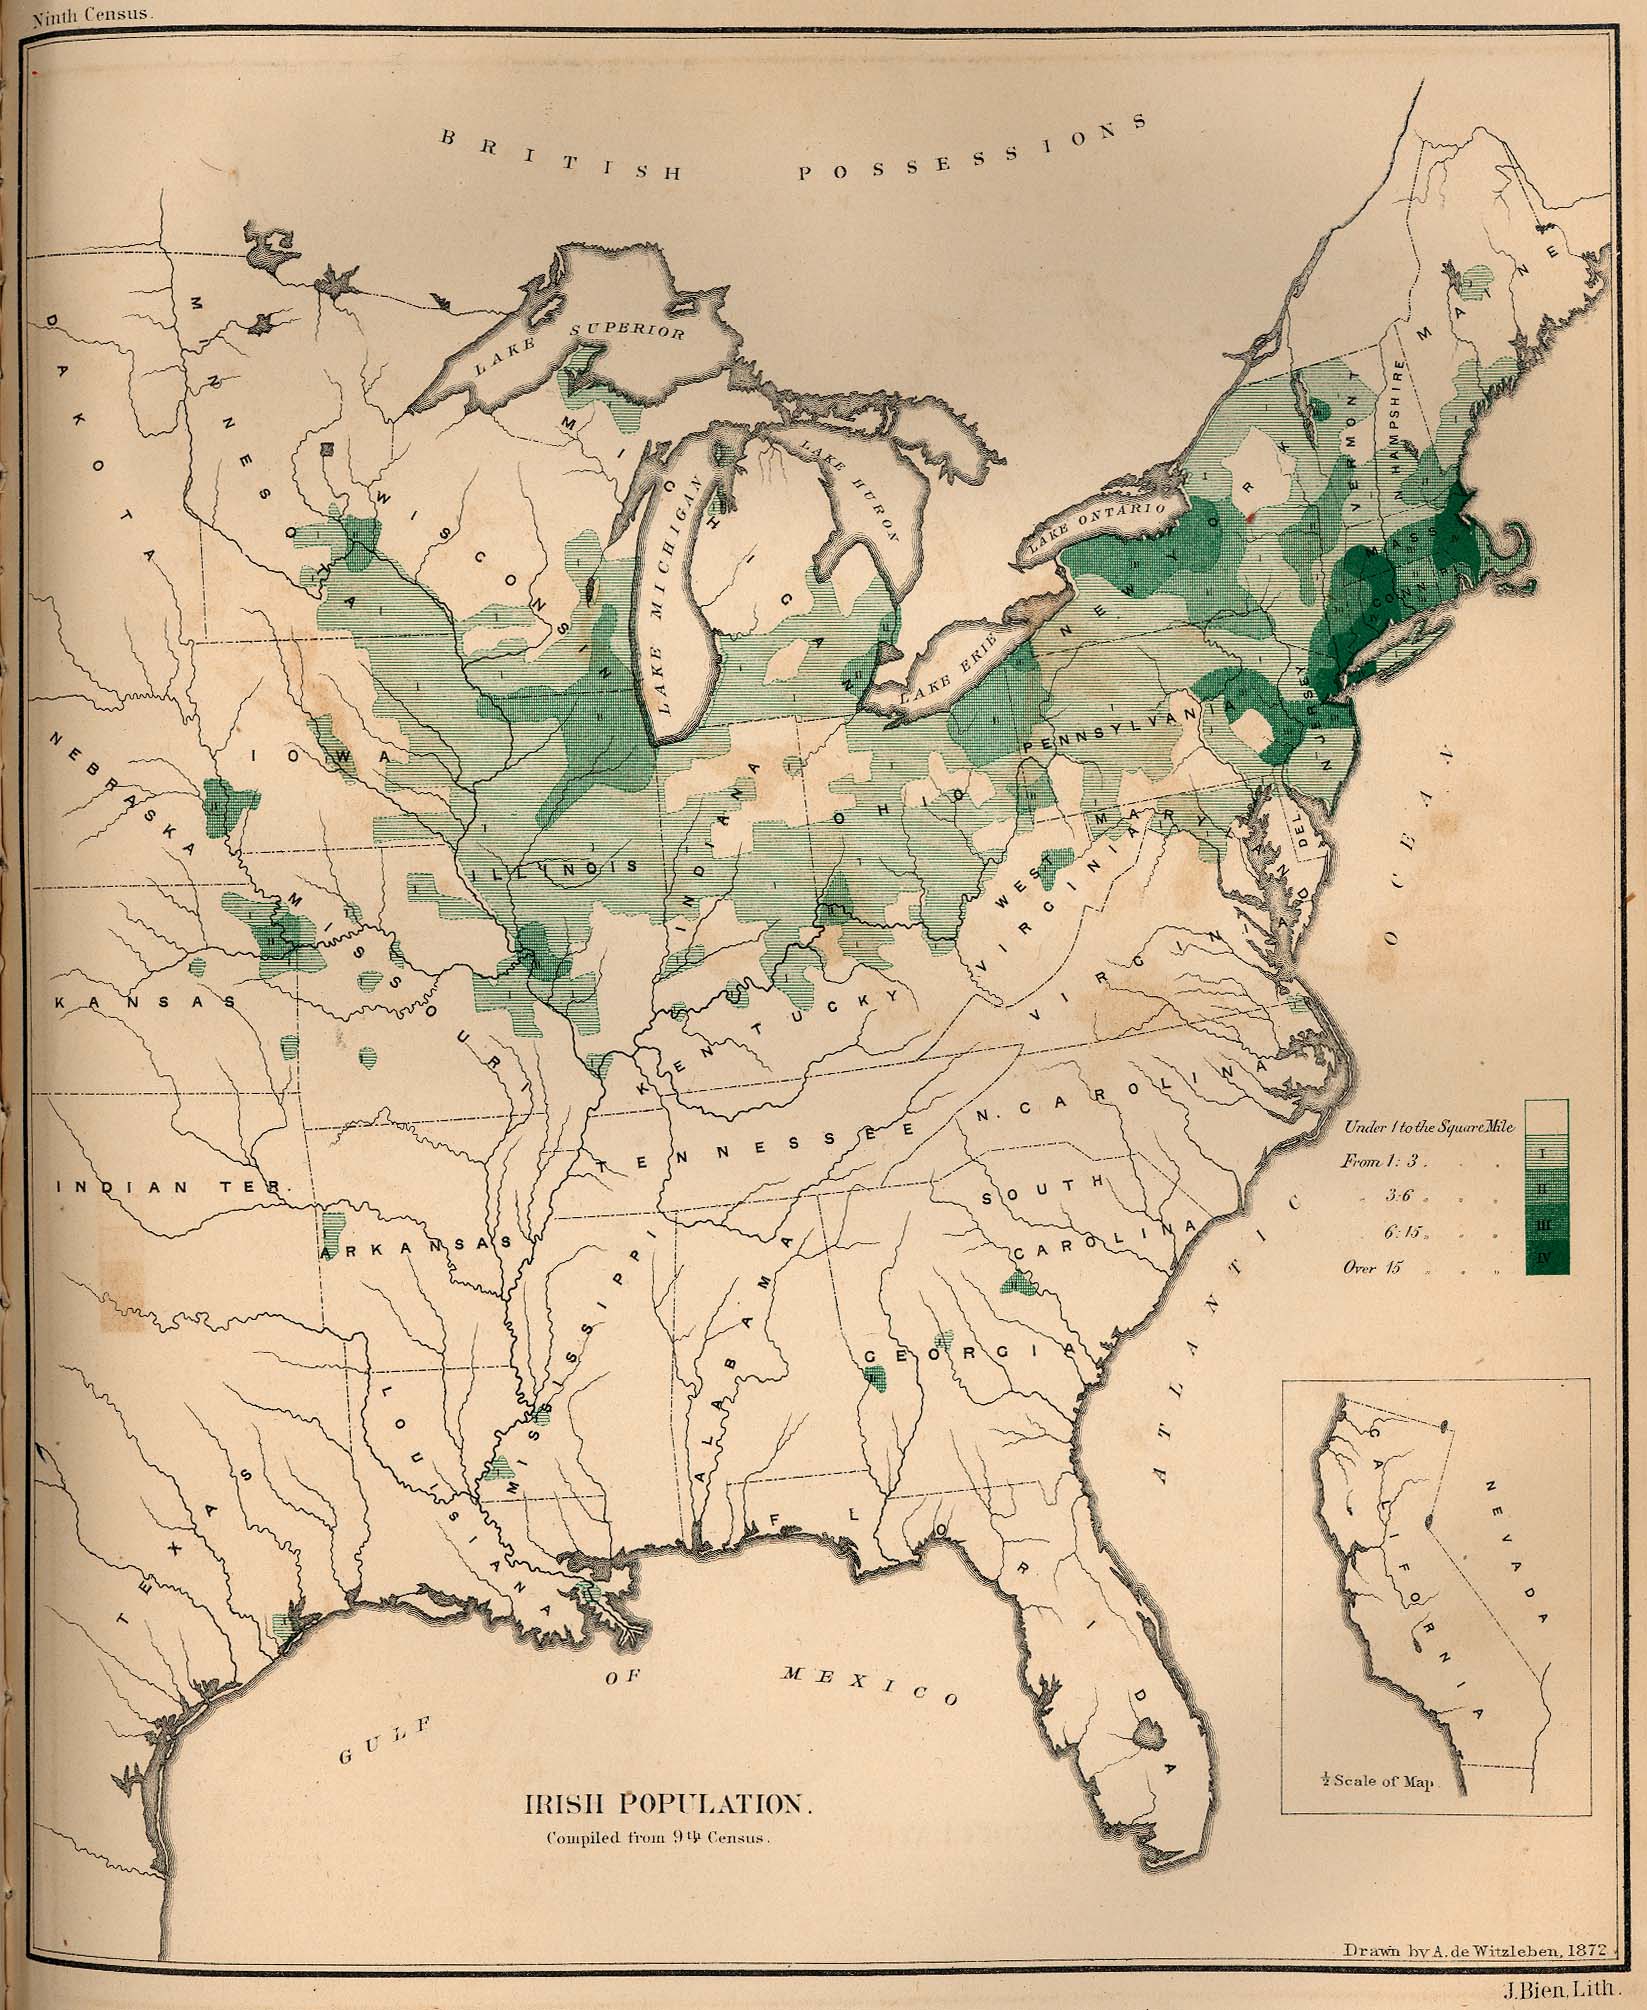 Irish population in 1872, map, drawn by A. de Witzleben, J. Bien lith. New York; source: The Statistics of the Population of the United States, Compiled from the Original Returns of the Ninth Census, 1872; University of Texas Library, Perry-Castañeda Library, Map Collection, http://www.lib.utexas.edu/maps/historical/irish_pop_1872.jpg.